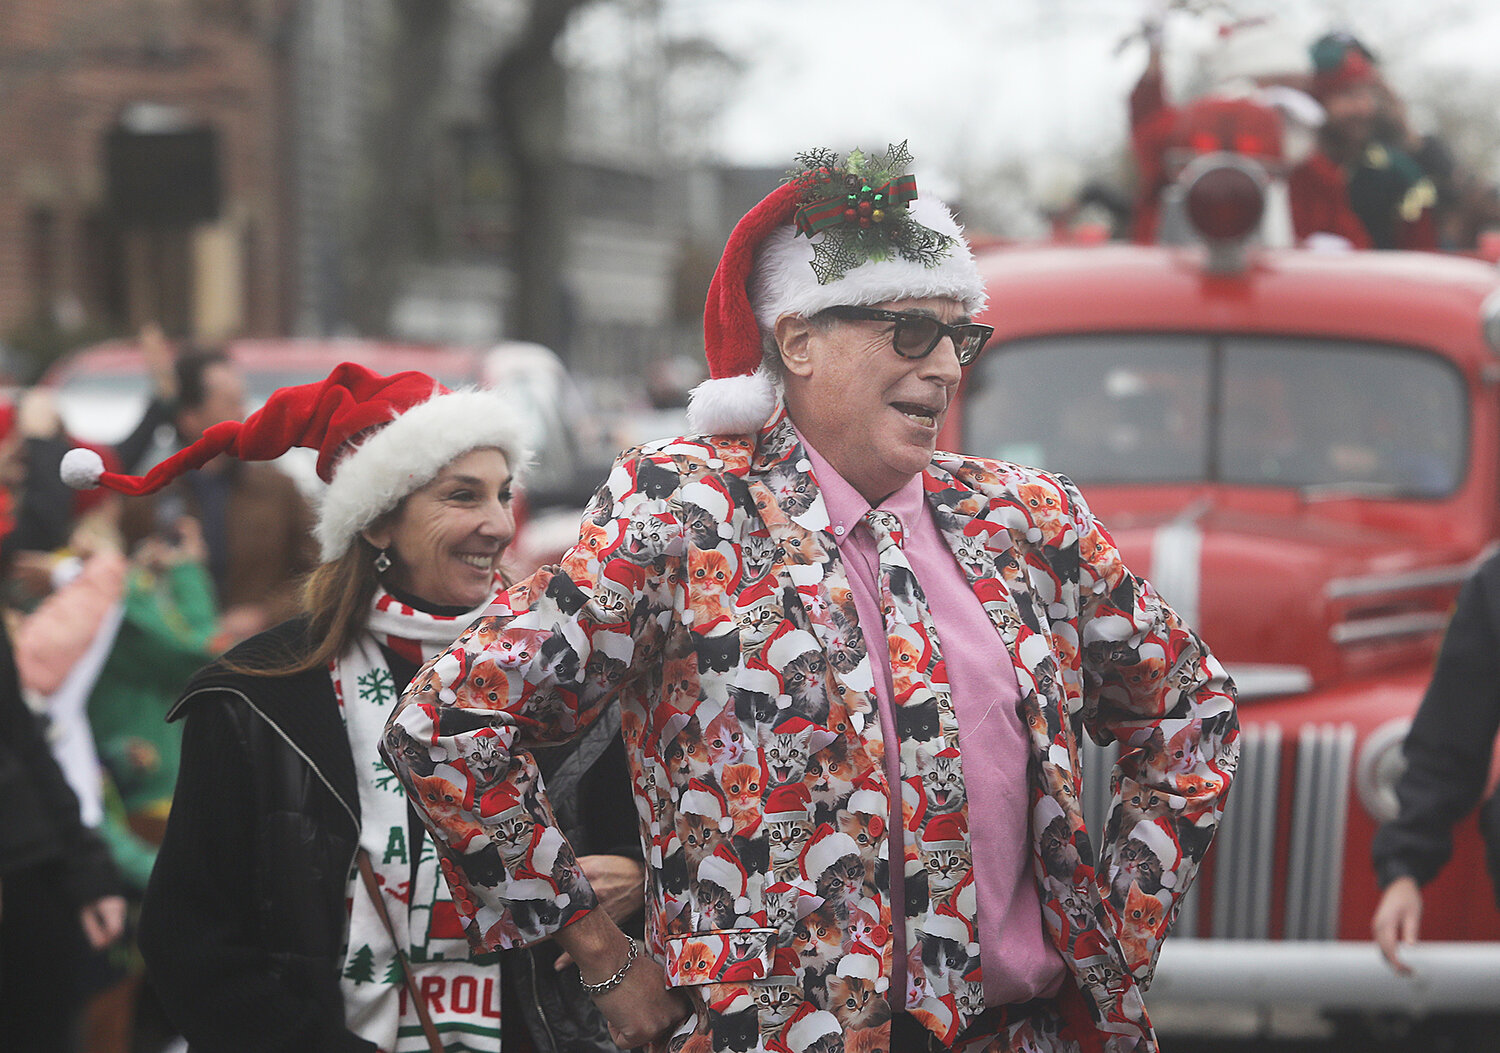 Holiday costumes, the more flamboyant the better, are a common sight around town during Stroll.